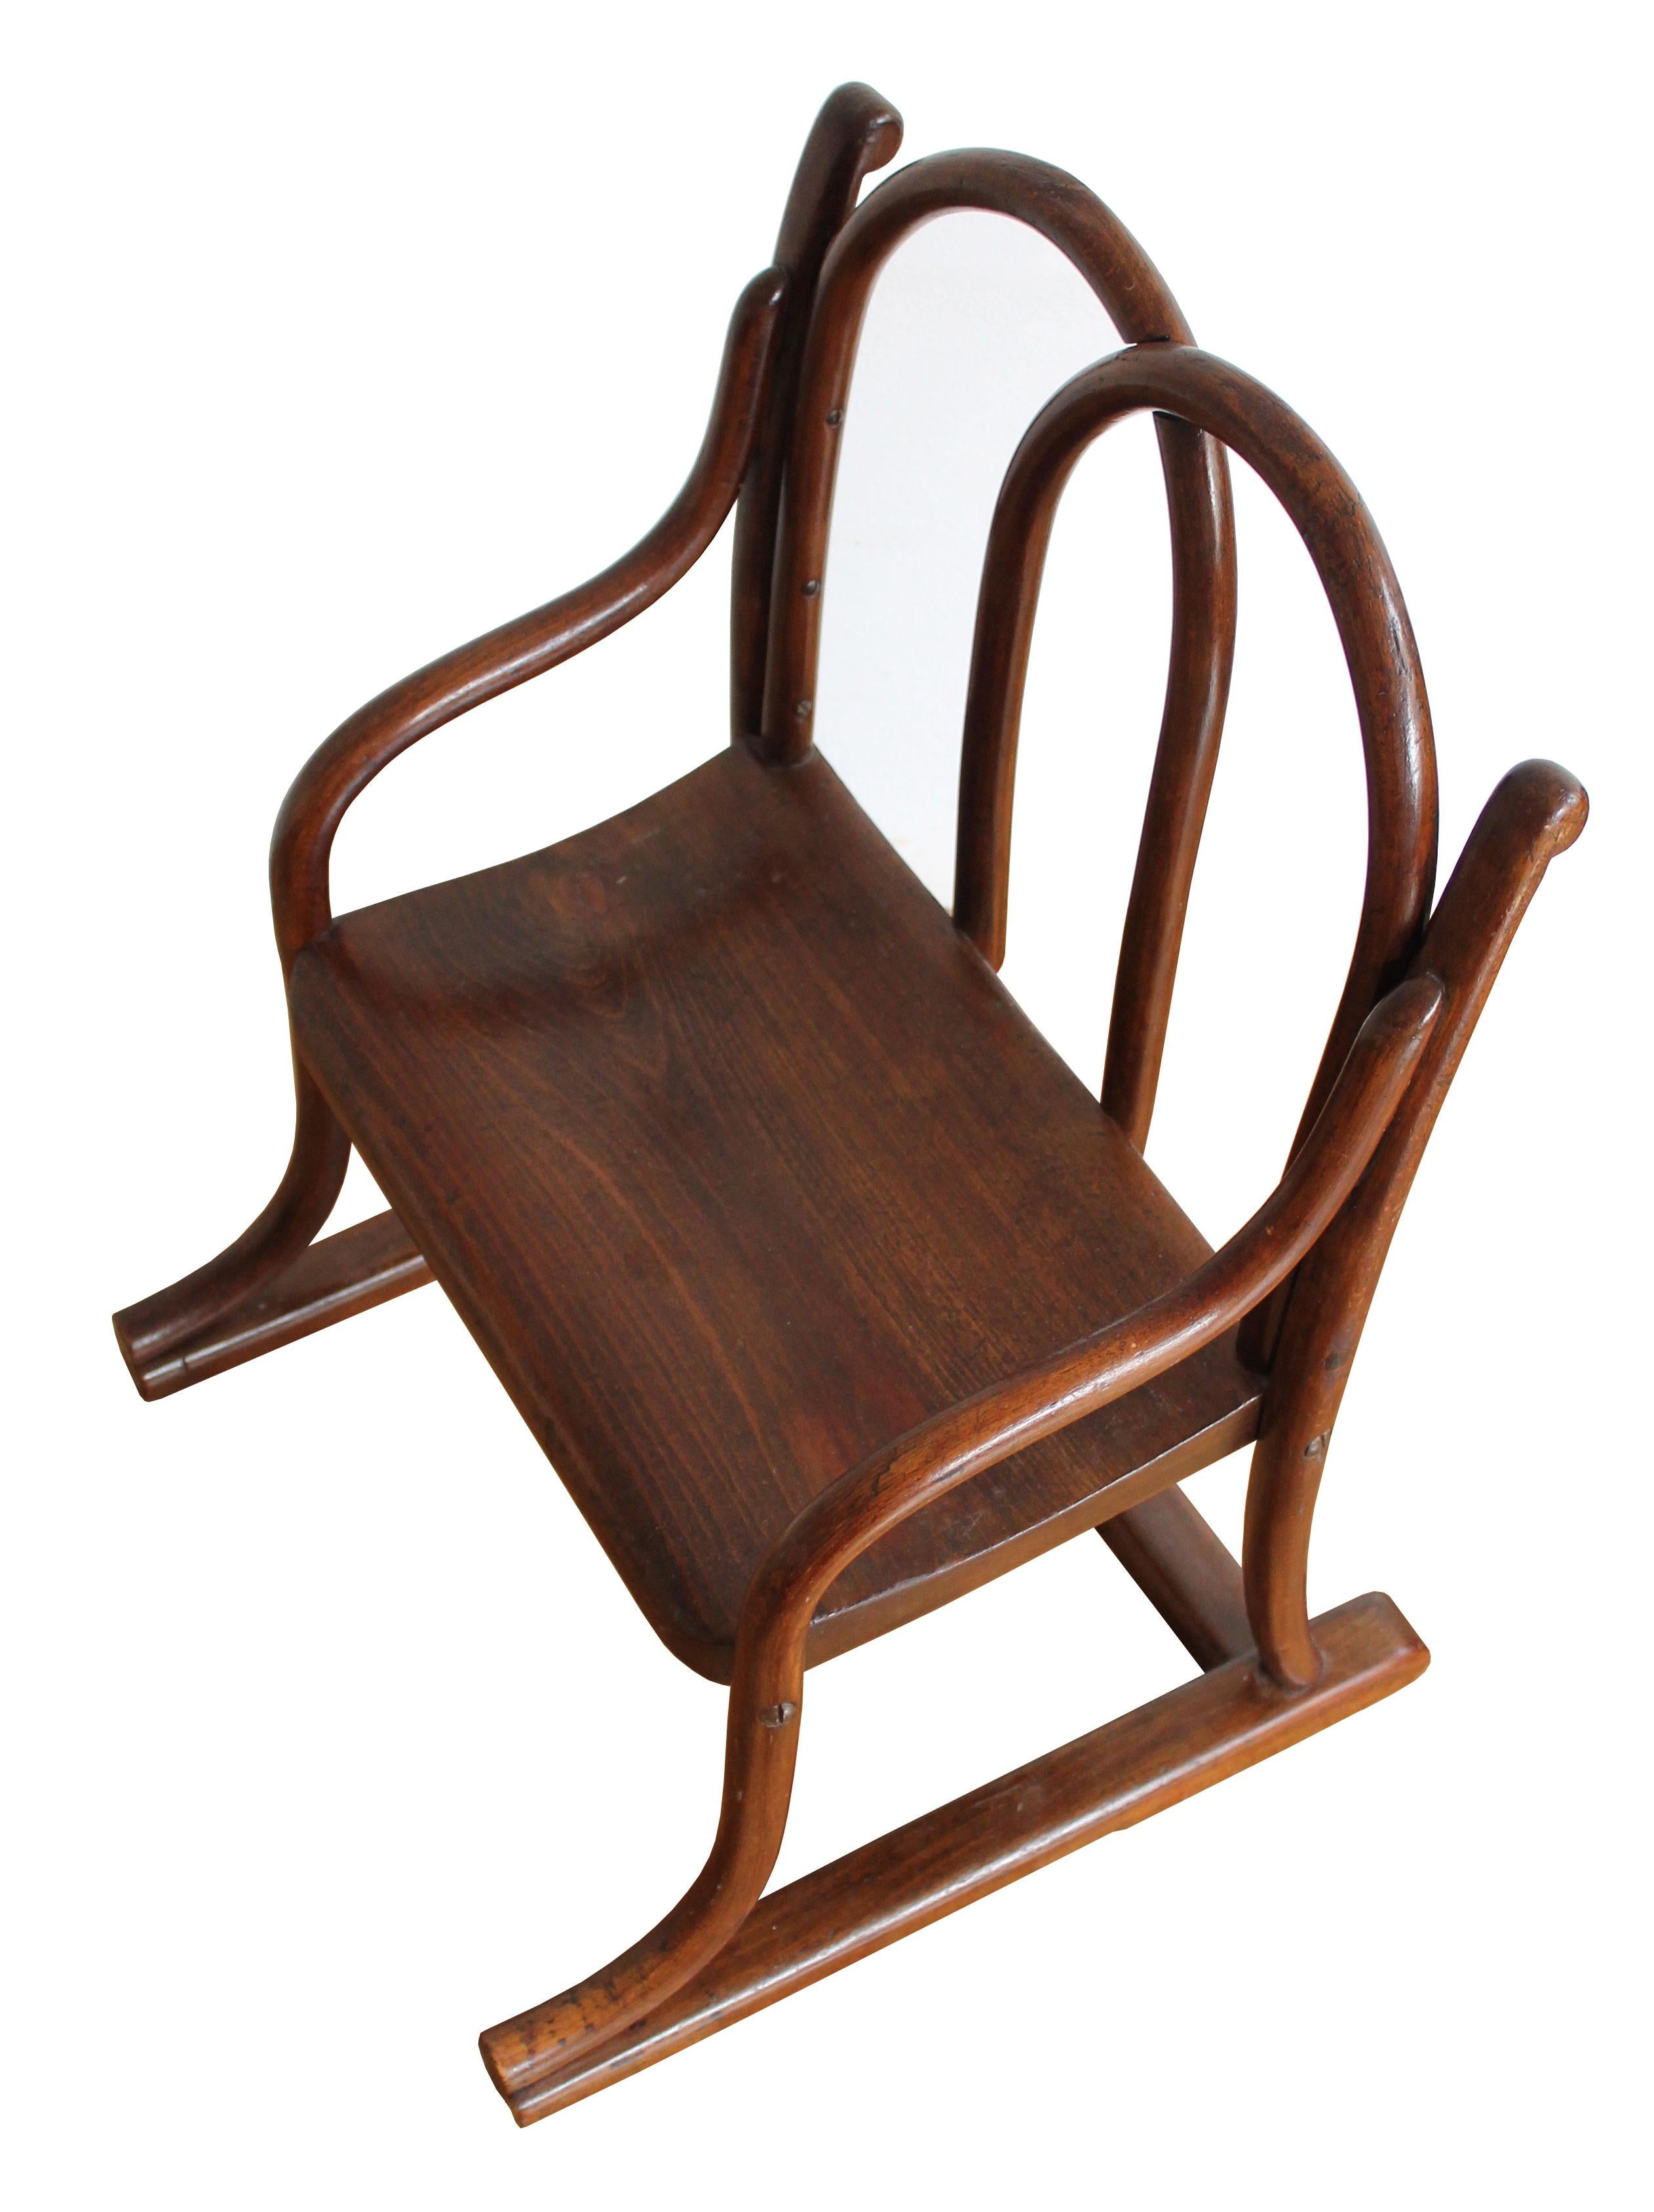 An authentic bentwood kids chair made at the beginning of the 20th century. Originally this chair was connected to a small desk as one piece. Thonet was producing this type of kid’s furniture from late the 19th Century. There were various designs